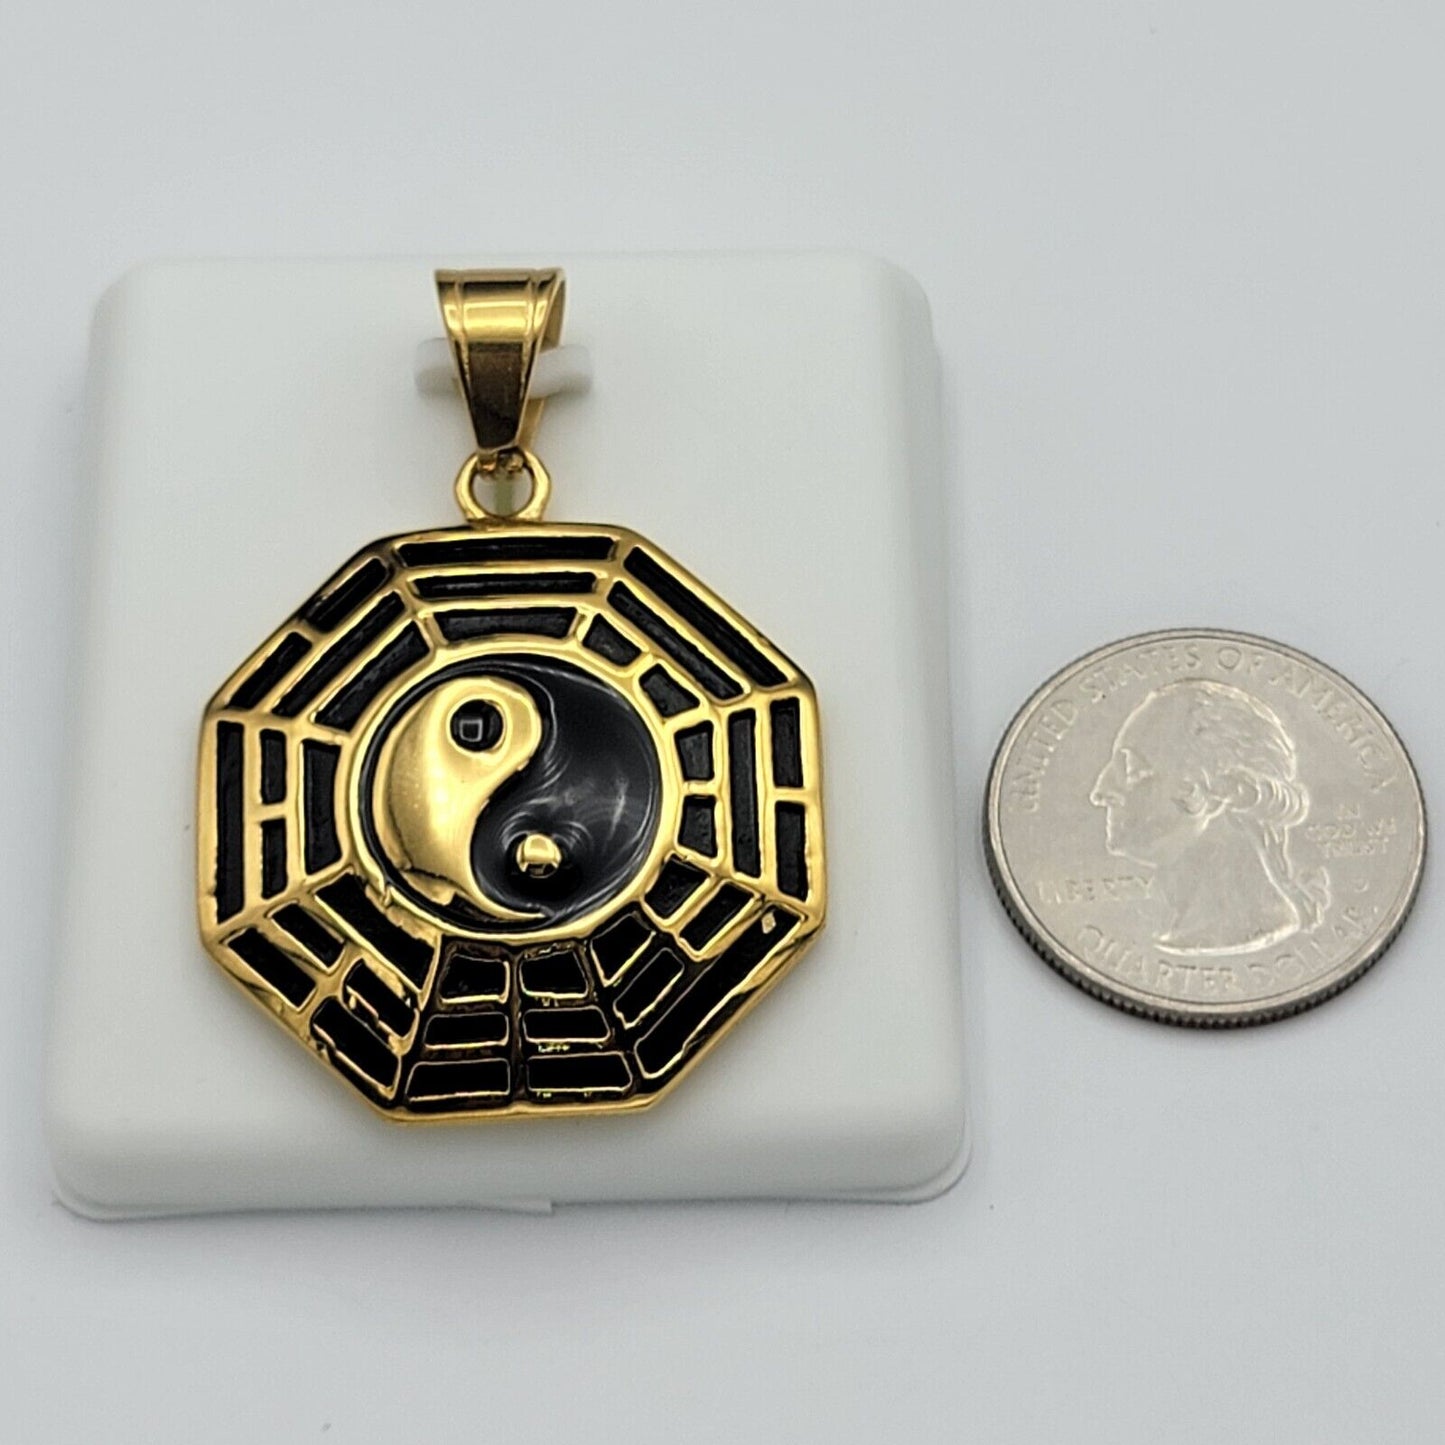 Necklaces - 24K Gold Plated. Two Tones Yin & Yang Taiji Bagua Pendant & Chain.